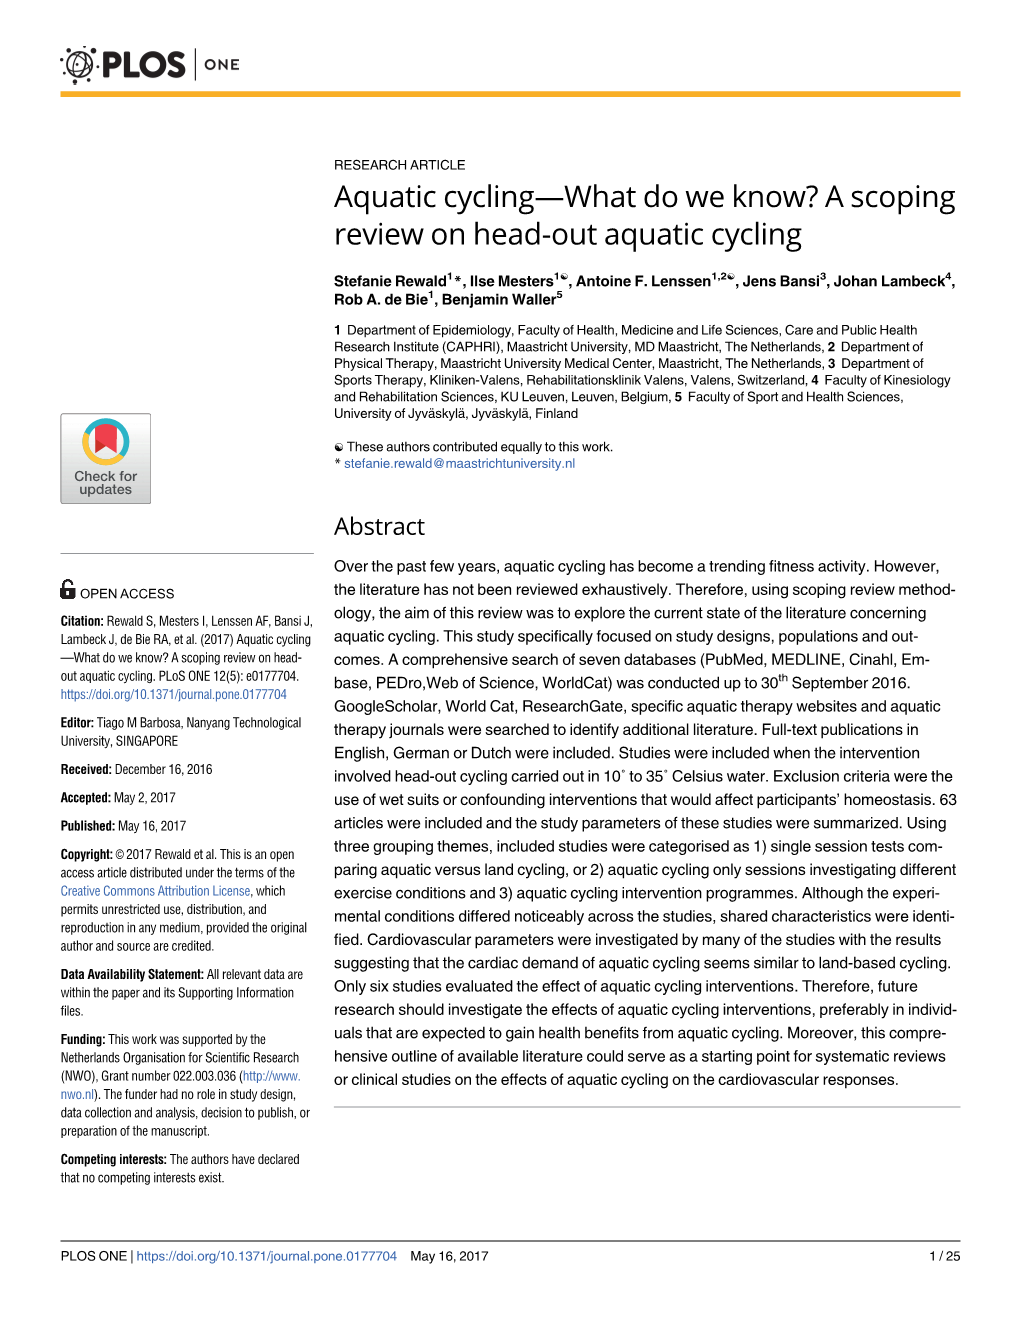 Aquatic Cycling—What Do We Know? a Scoping Review on Head-Out Aquatic Cycling